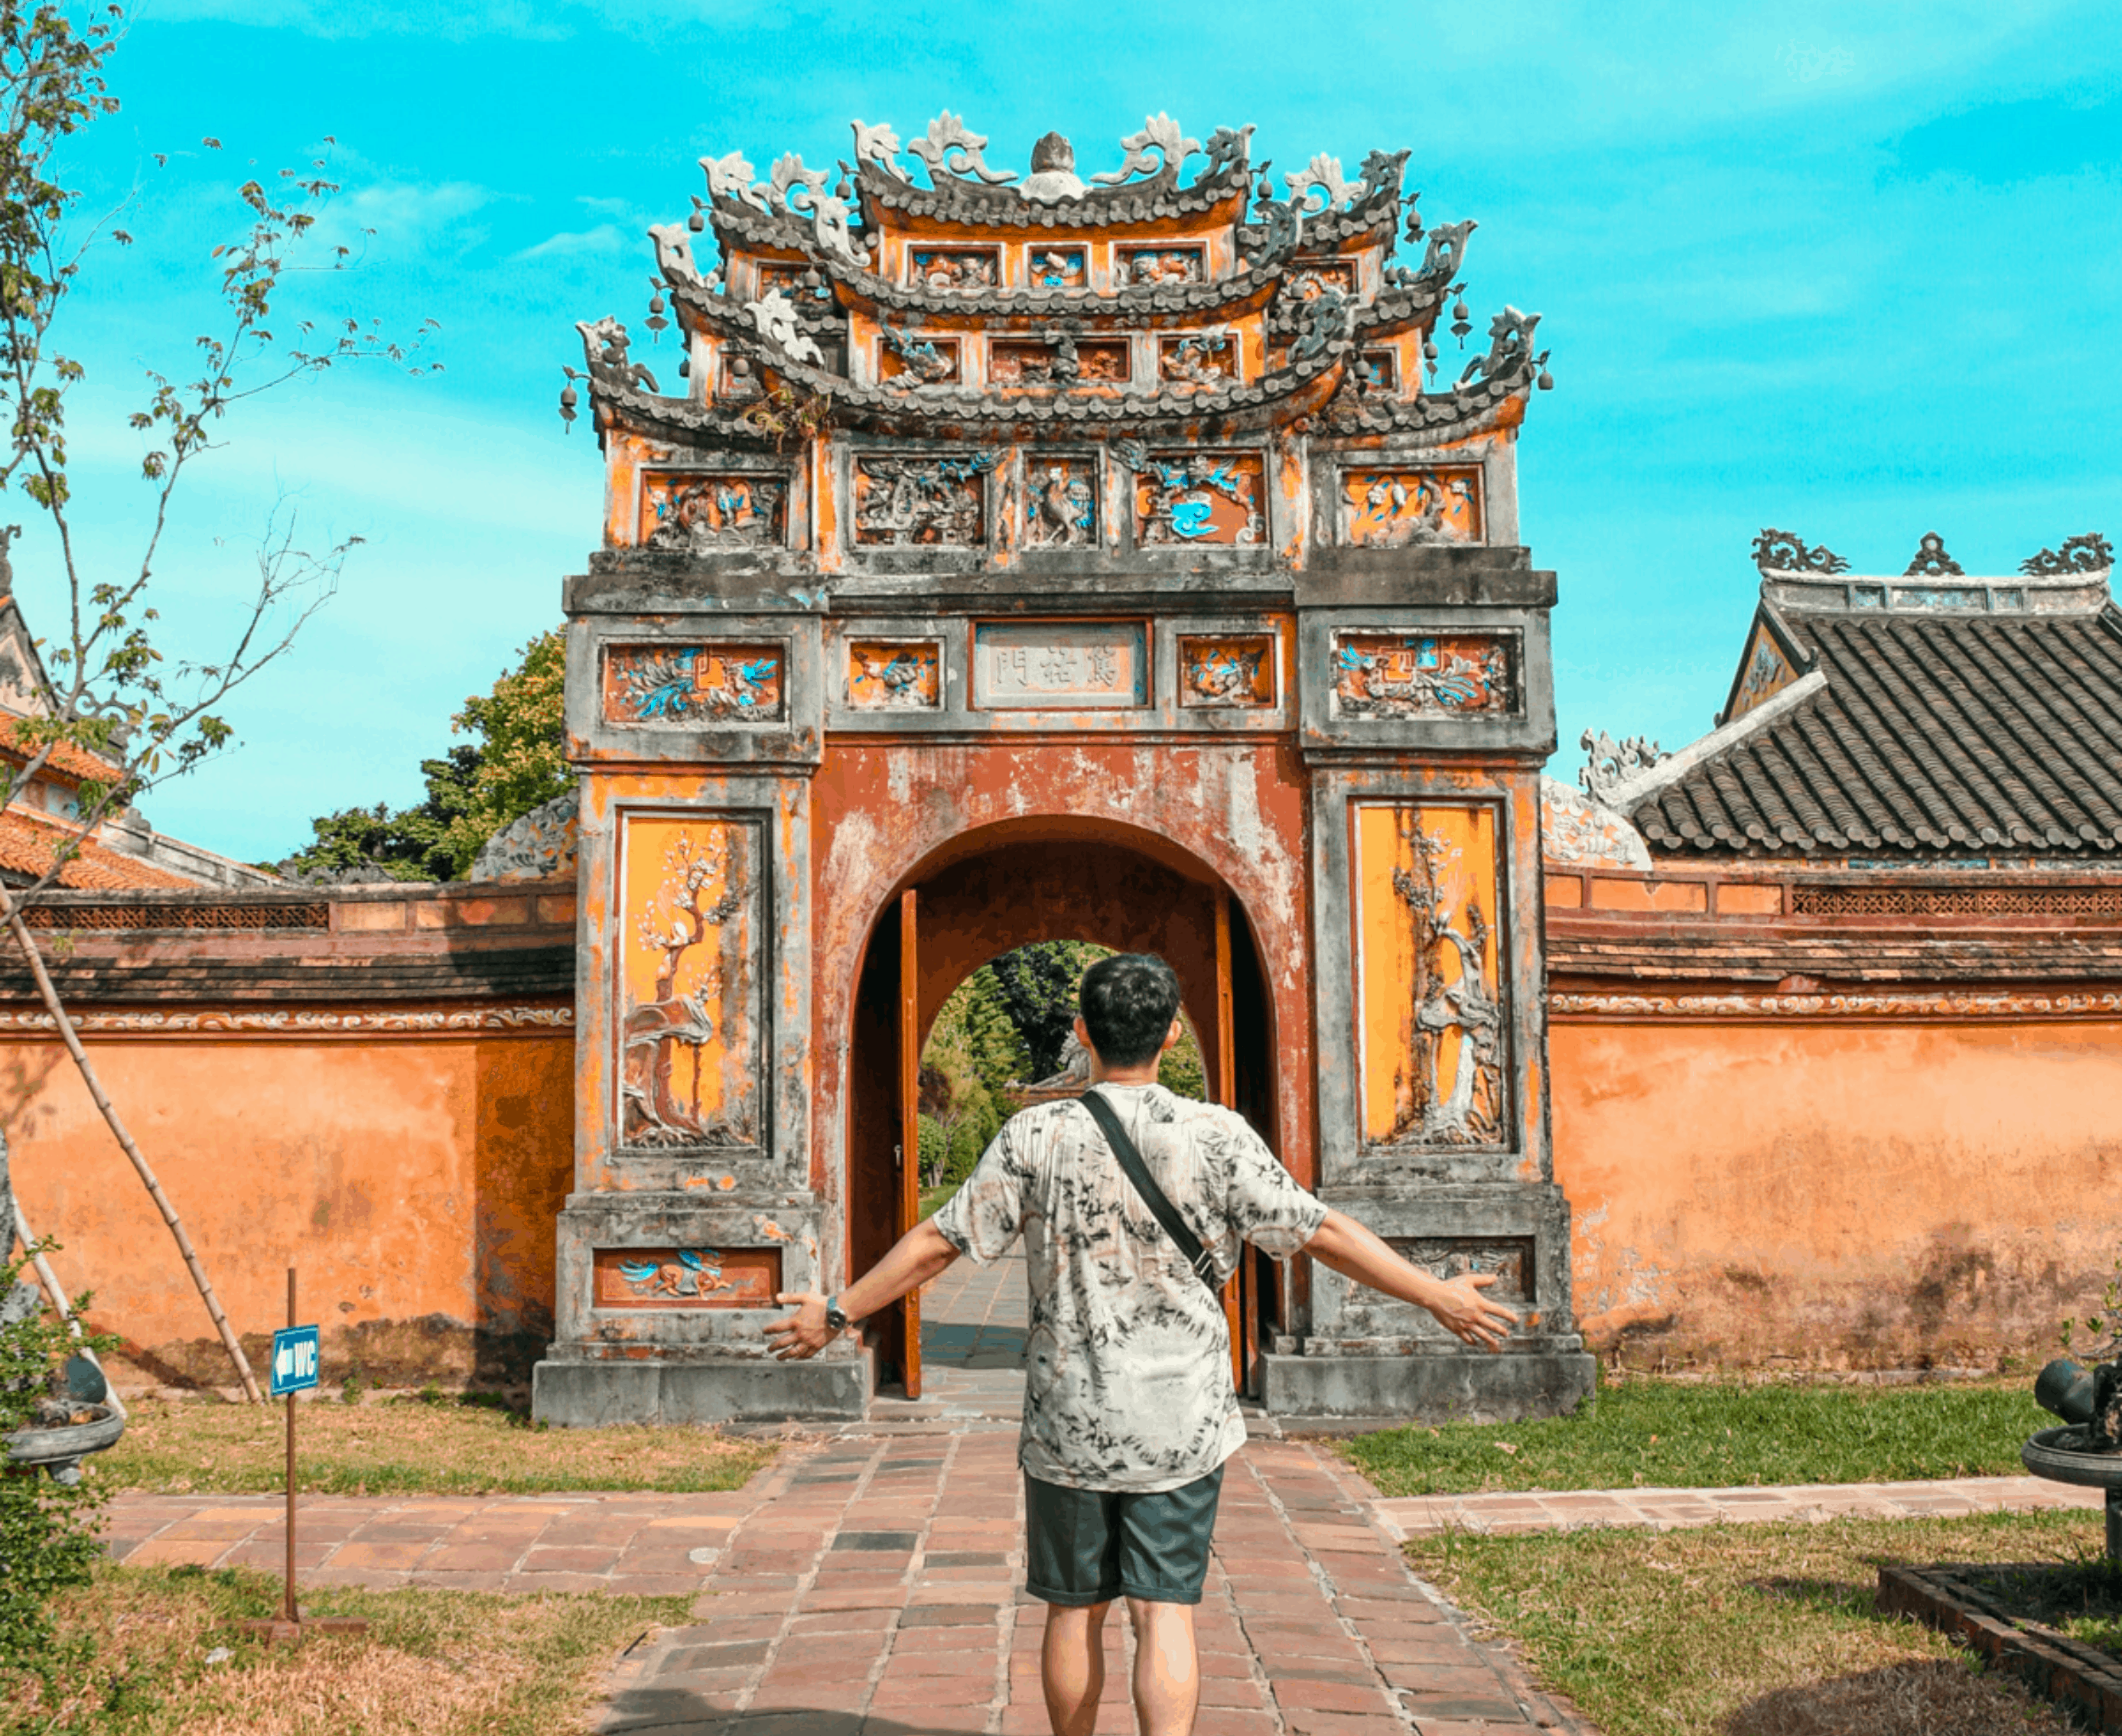 Hue Travel from China A Guide to Exploring the Ancient City of Hue in Vietnam